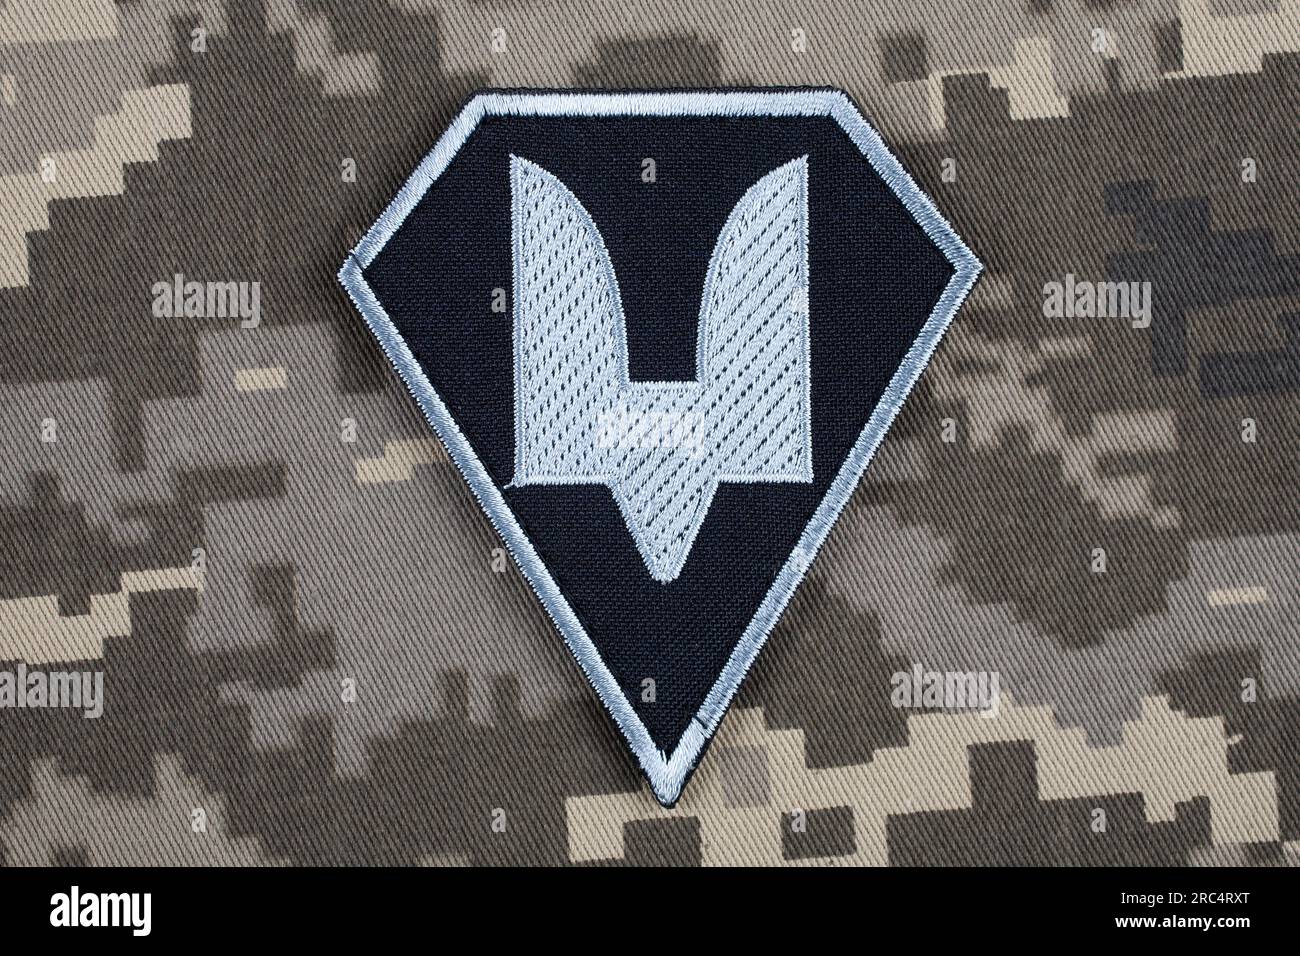 KYIV, UKRAINE - October 5, 2022. Russian invasion in Ukraine 2022. The Special Operations Forces of Ukraine Army uniform shoulder sleeve insignia badg Stock Photo